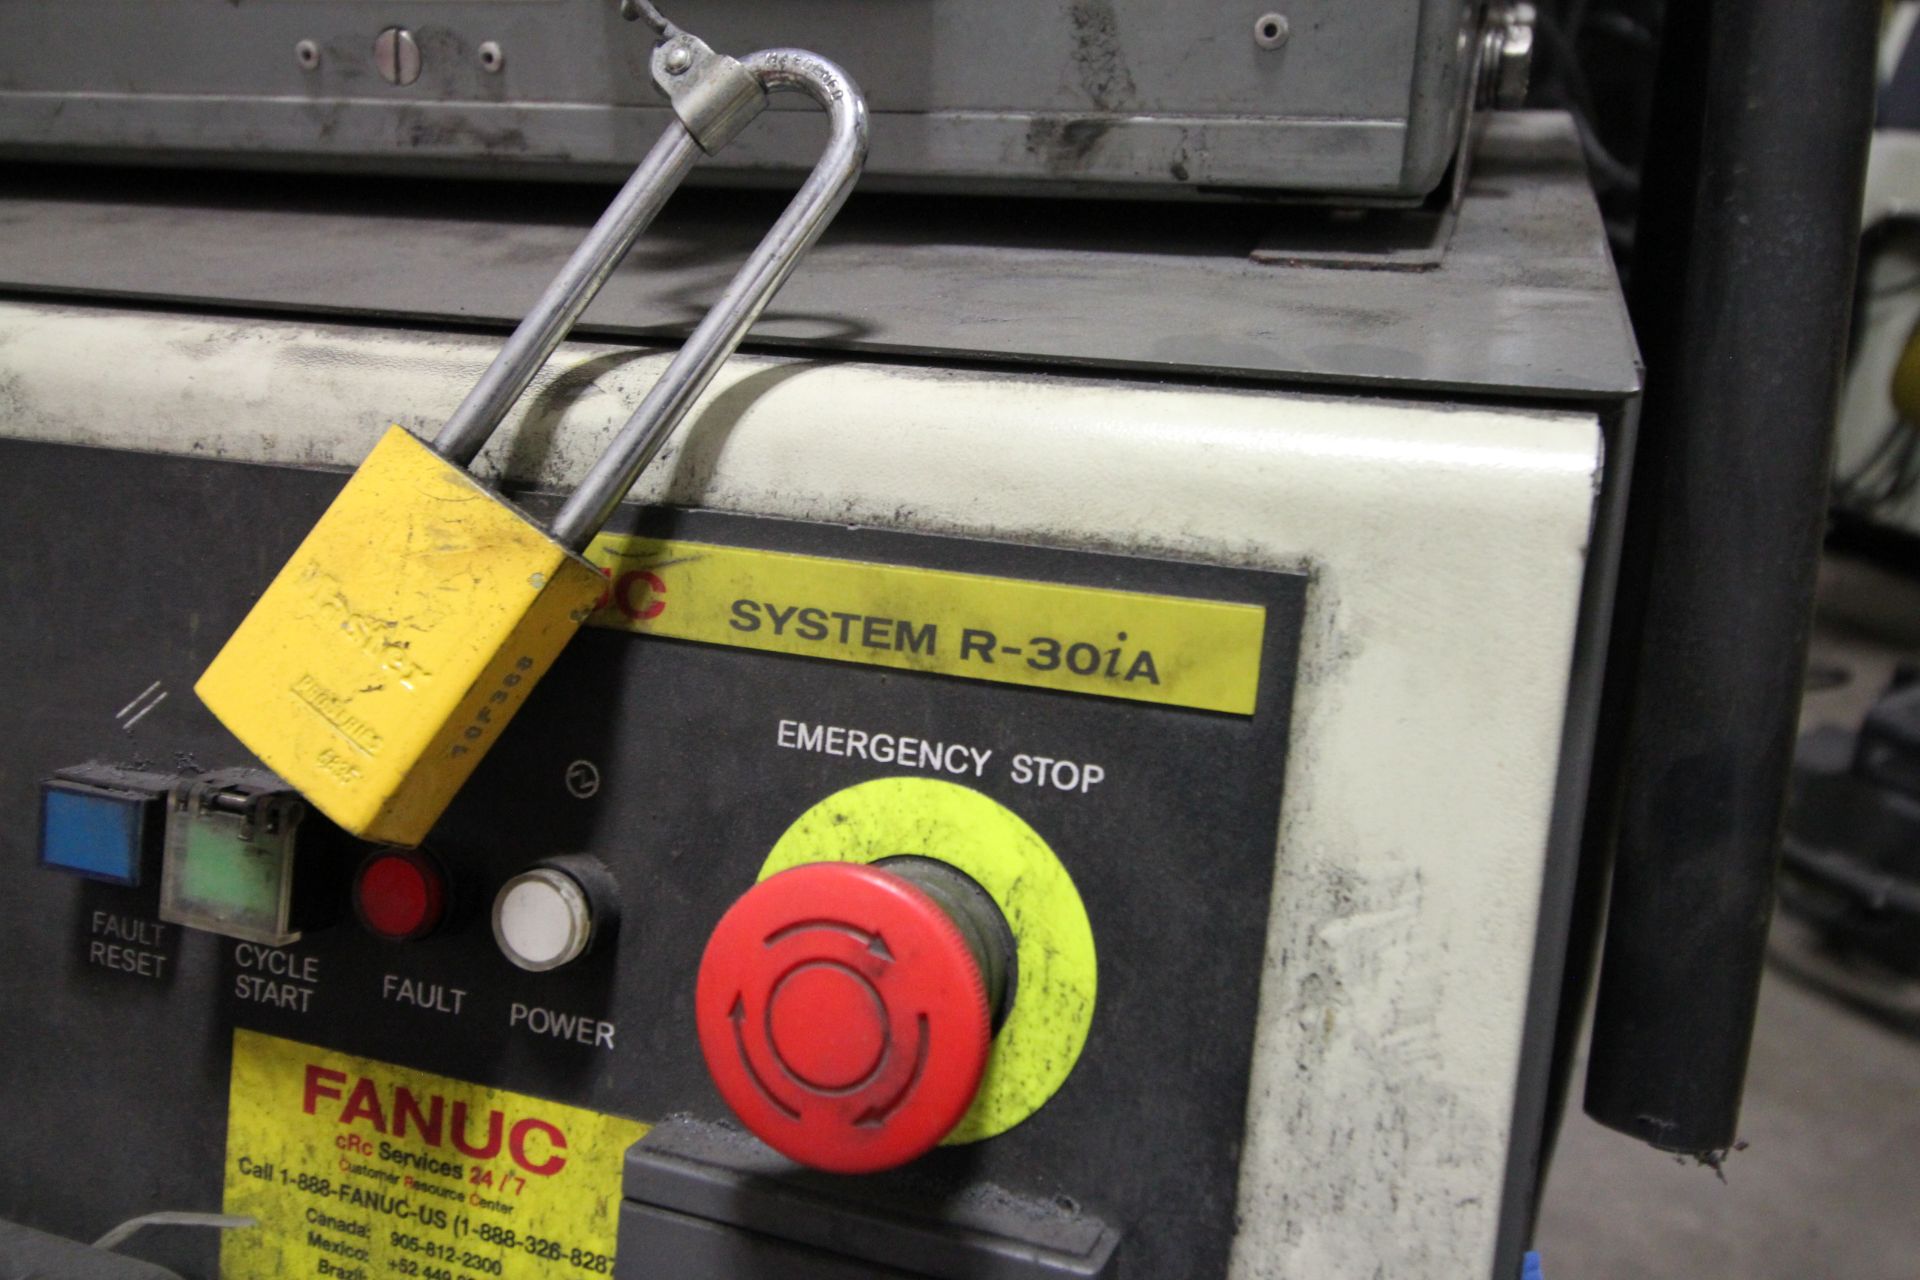 FANUC ROBOT R-2000iB/210F WITH R-30iA CONTROL, CABLES & TEACH PENDANT, YEAR 2014 - Image 4 of 7